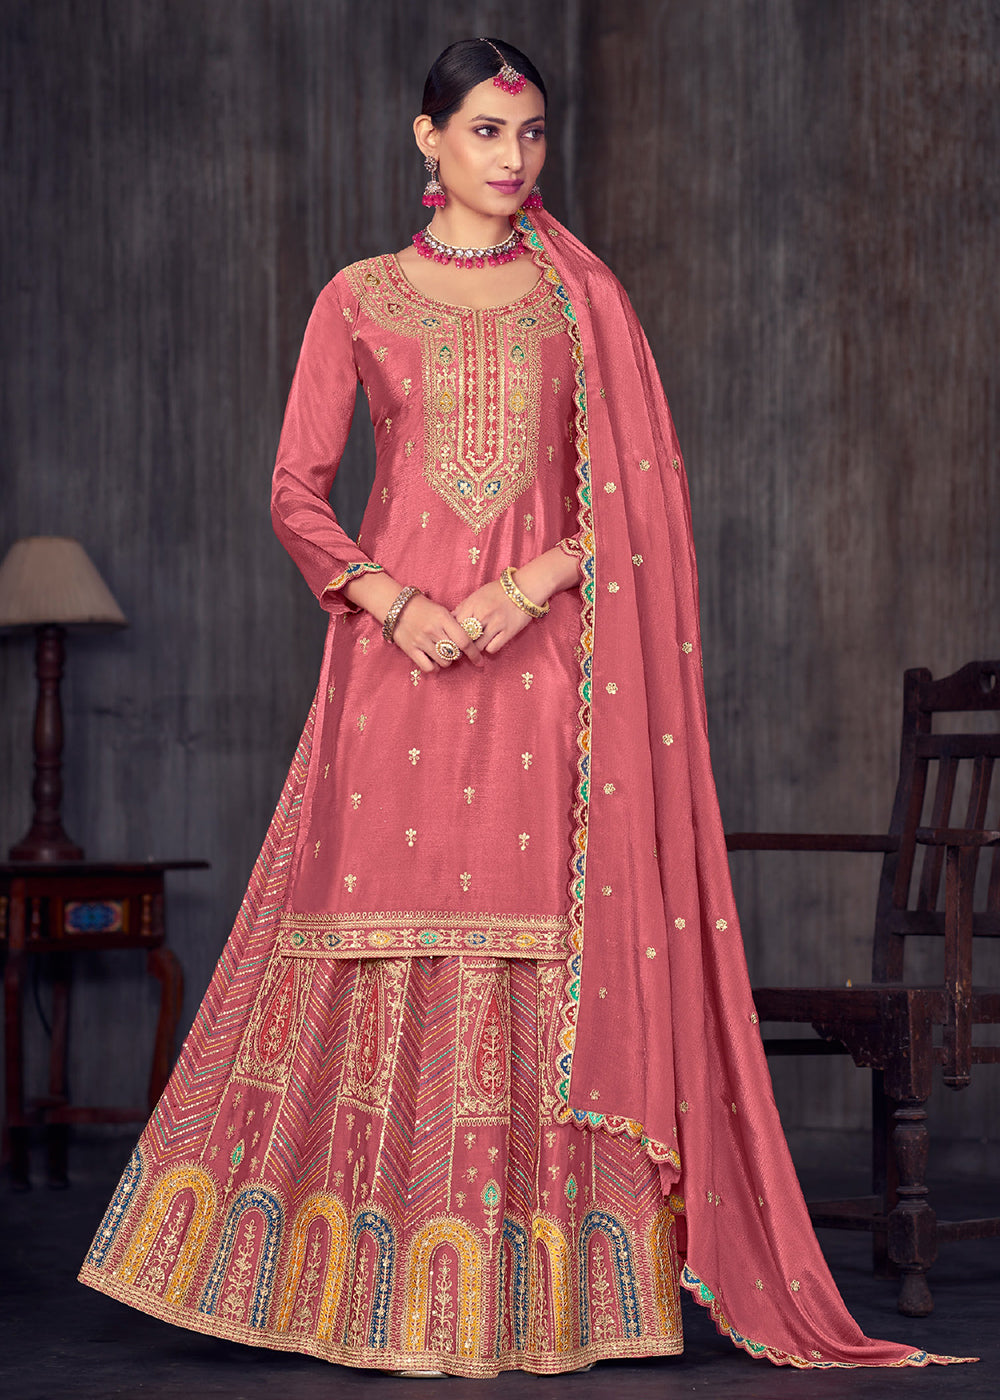 Buy Now Puce Pink Heavy Chinnon Embroidered Lehenga Kurti Suit Online in USA, UK, Canada, Germany, Australia & Worldwide at Empress Clothing. 